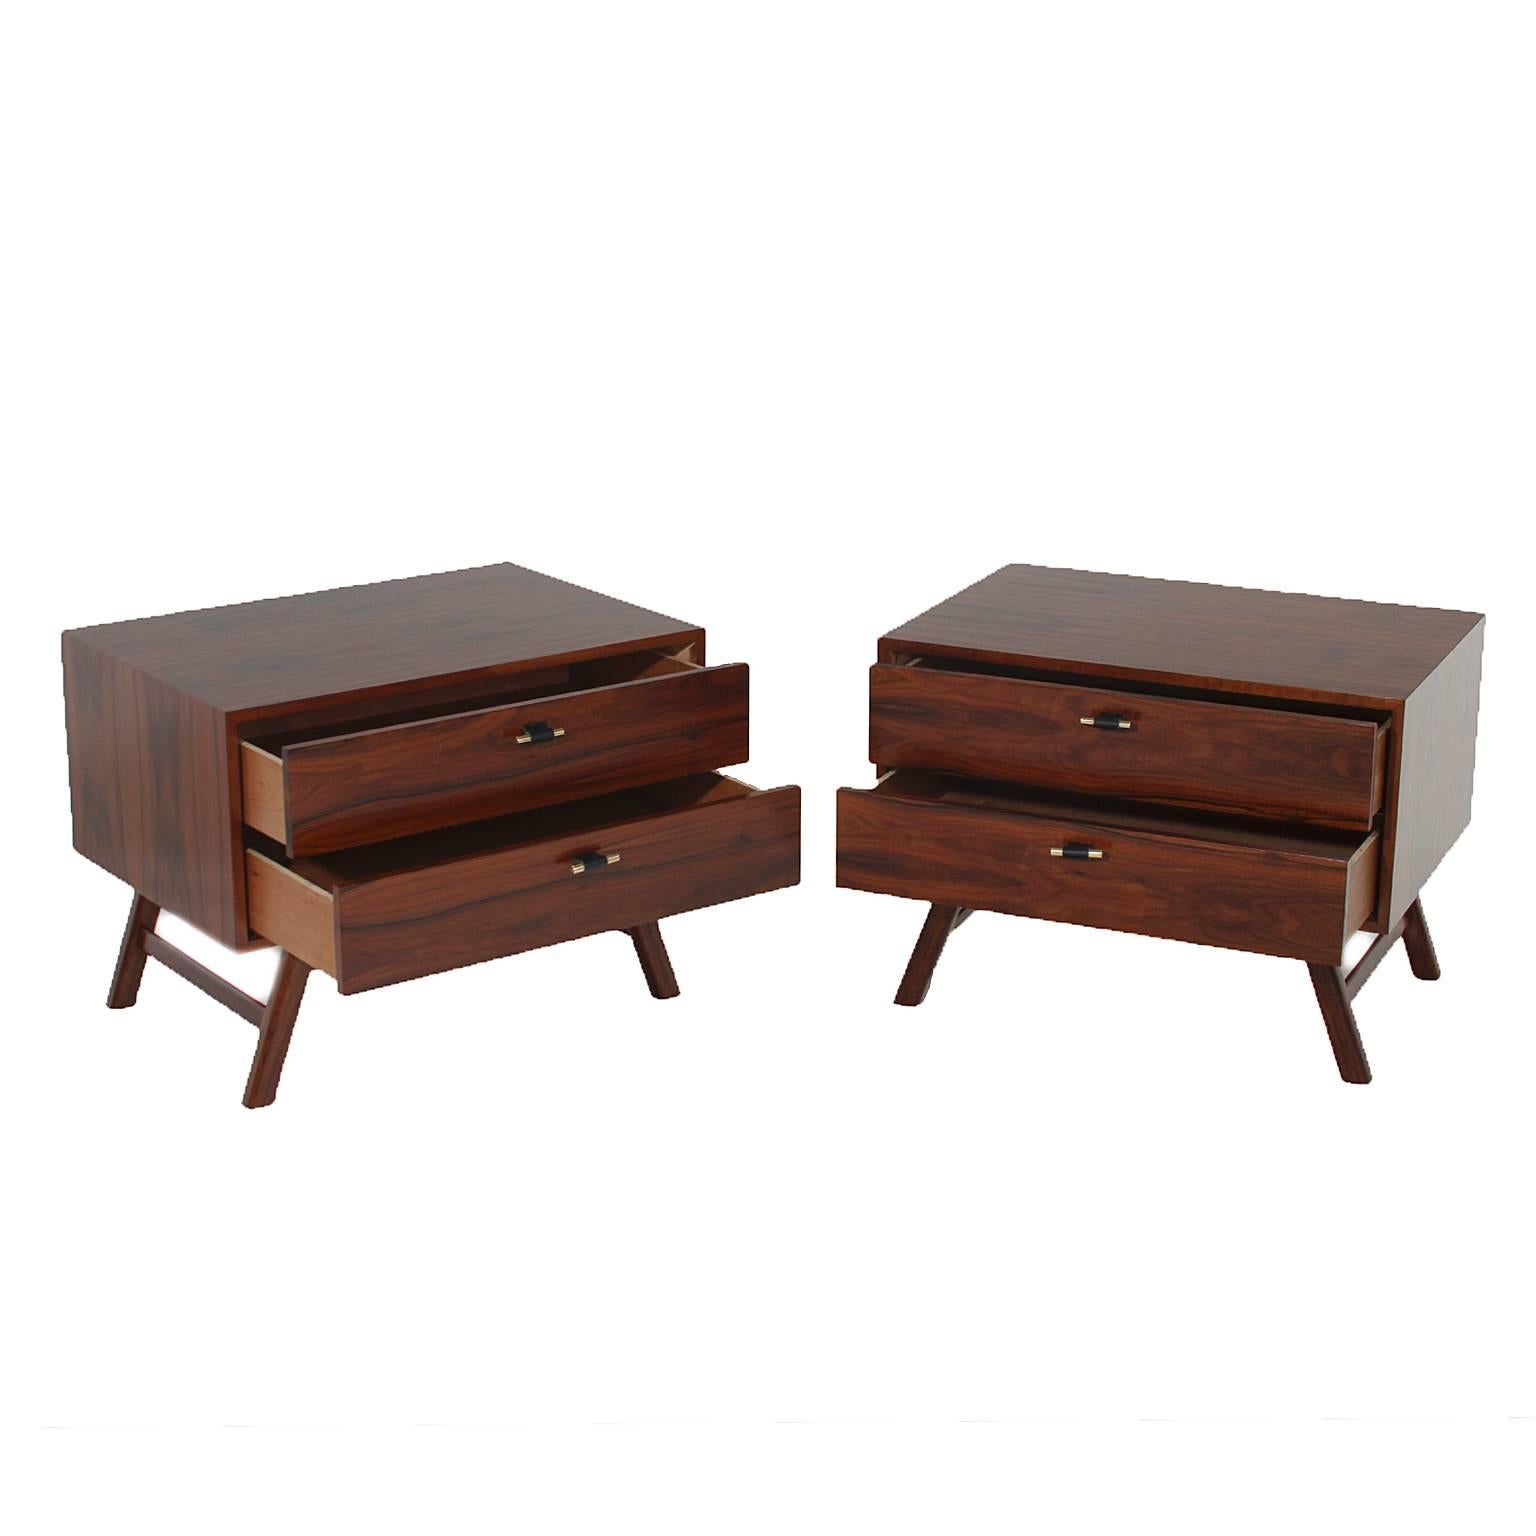 A stunning pair of Rosewood side tables or night stands with sculptural bases, soft close mechanisms and leather-wrapped Brass pulls.

WOOD OPTIONS:
Walnut, Mahogany, Oak, Rosewood

FINISH OPTIONS:
Satin Lacquer in bleached, natural, or